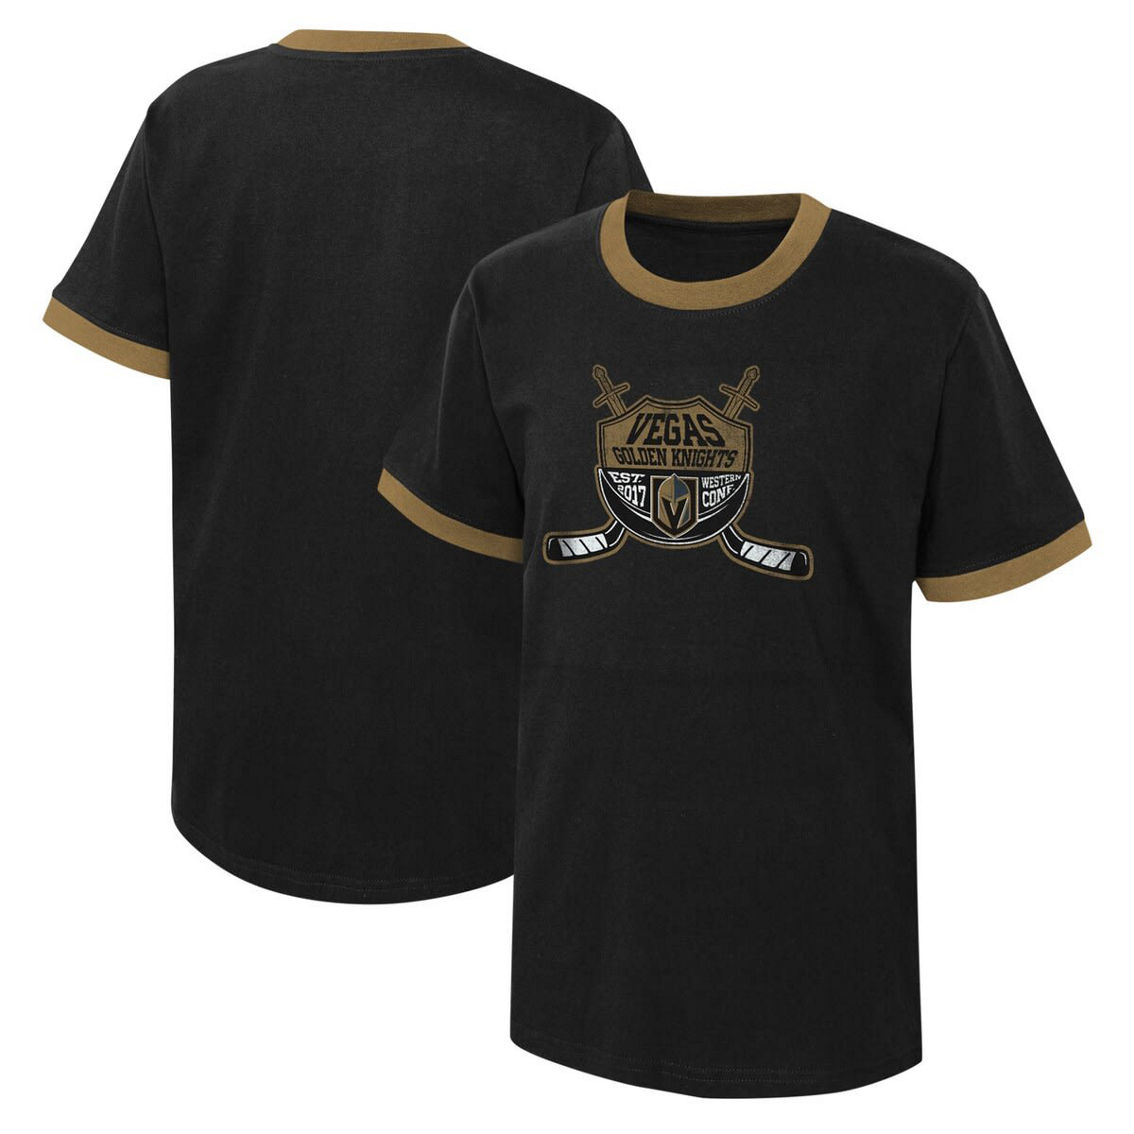 Outerstuff Youth Black Vegas Golden Knights Ice City T-Shirt - Image 2 of 4